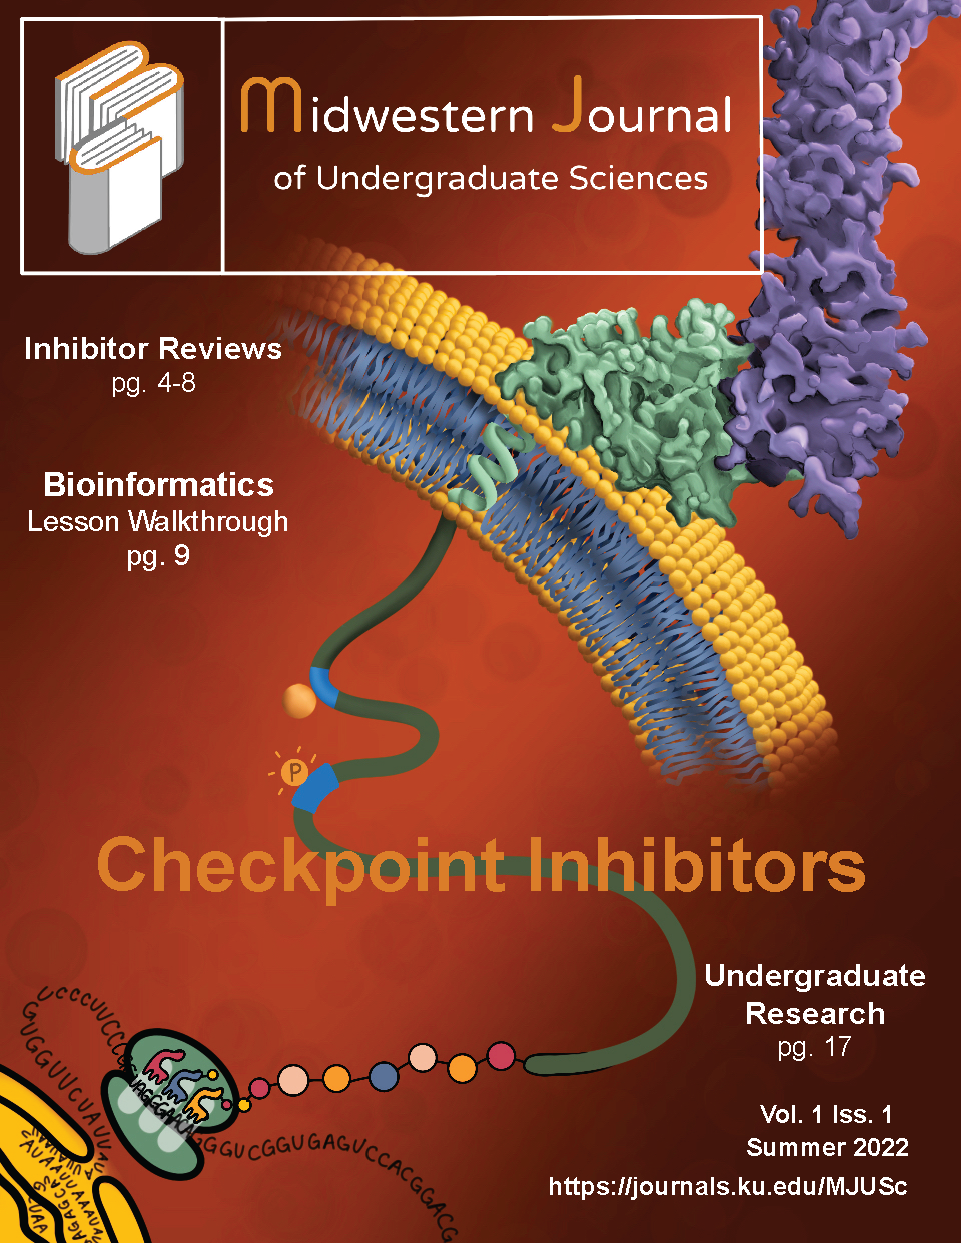 Cover of issue 1 of the Midwestern Journal of Undergraduate Sciences showing an illustration of checkpoint inhibitors